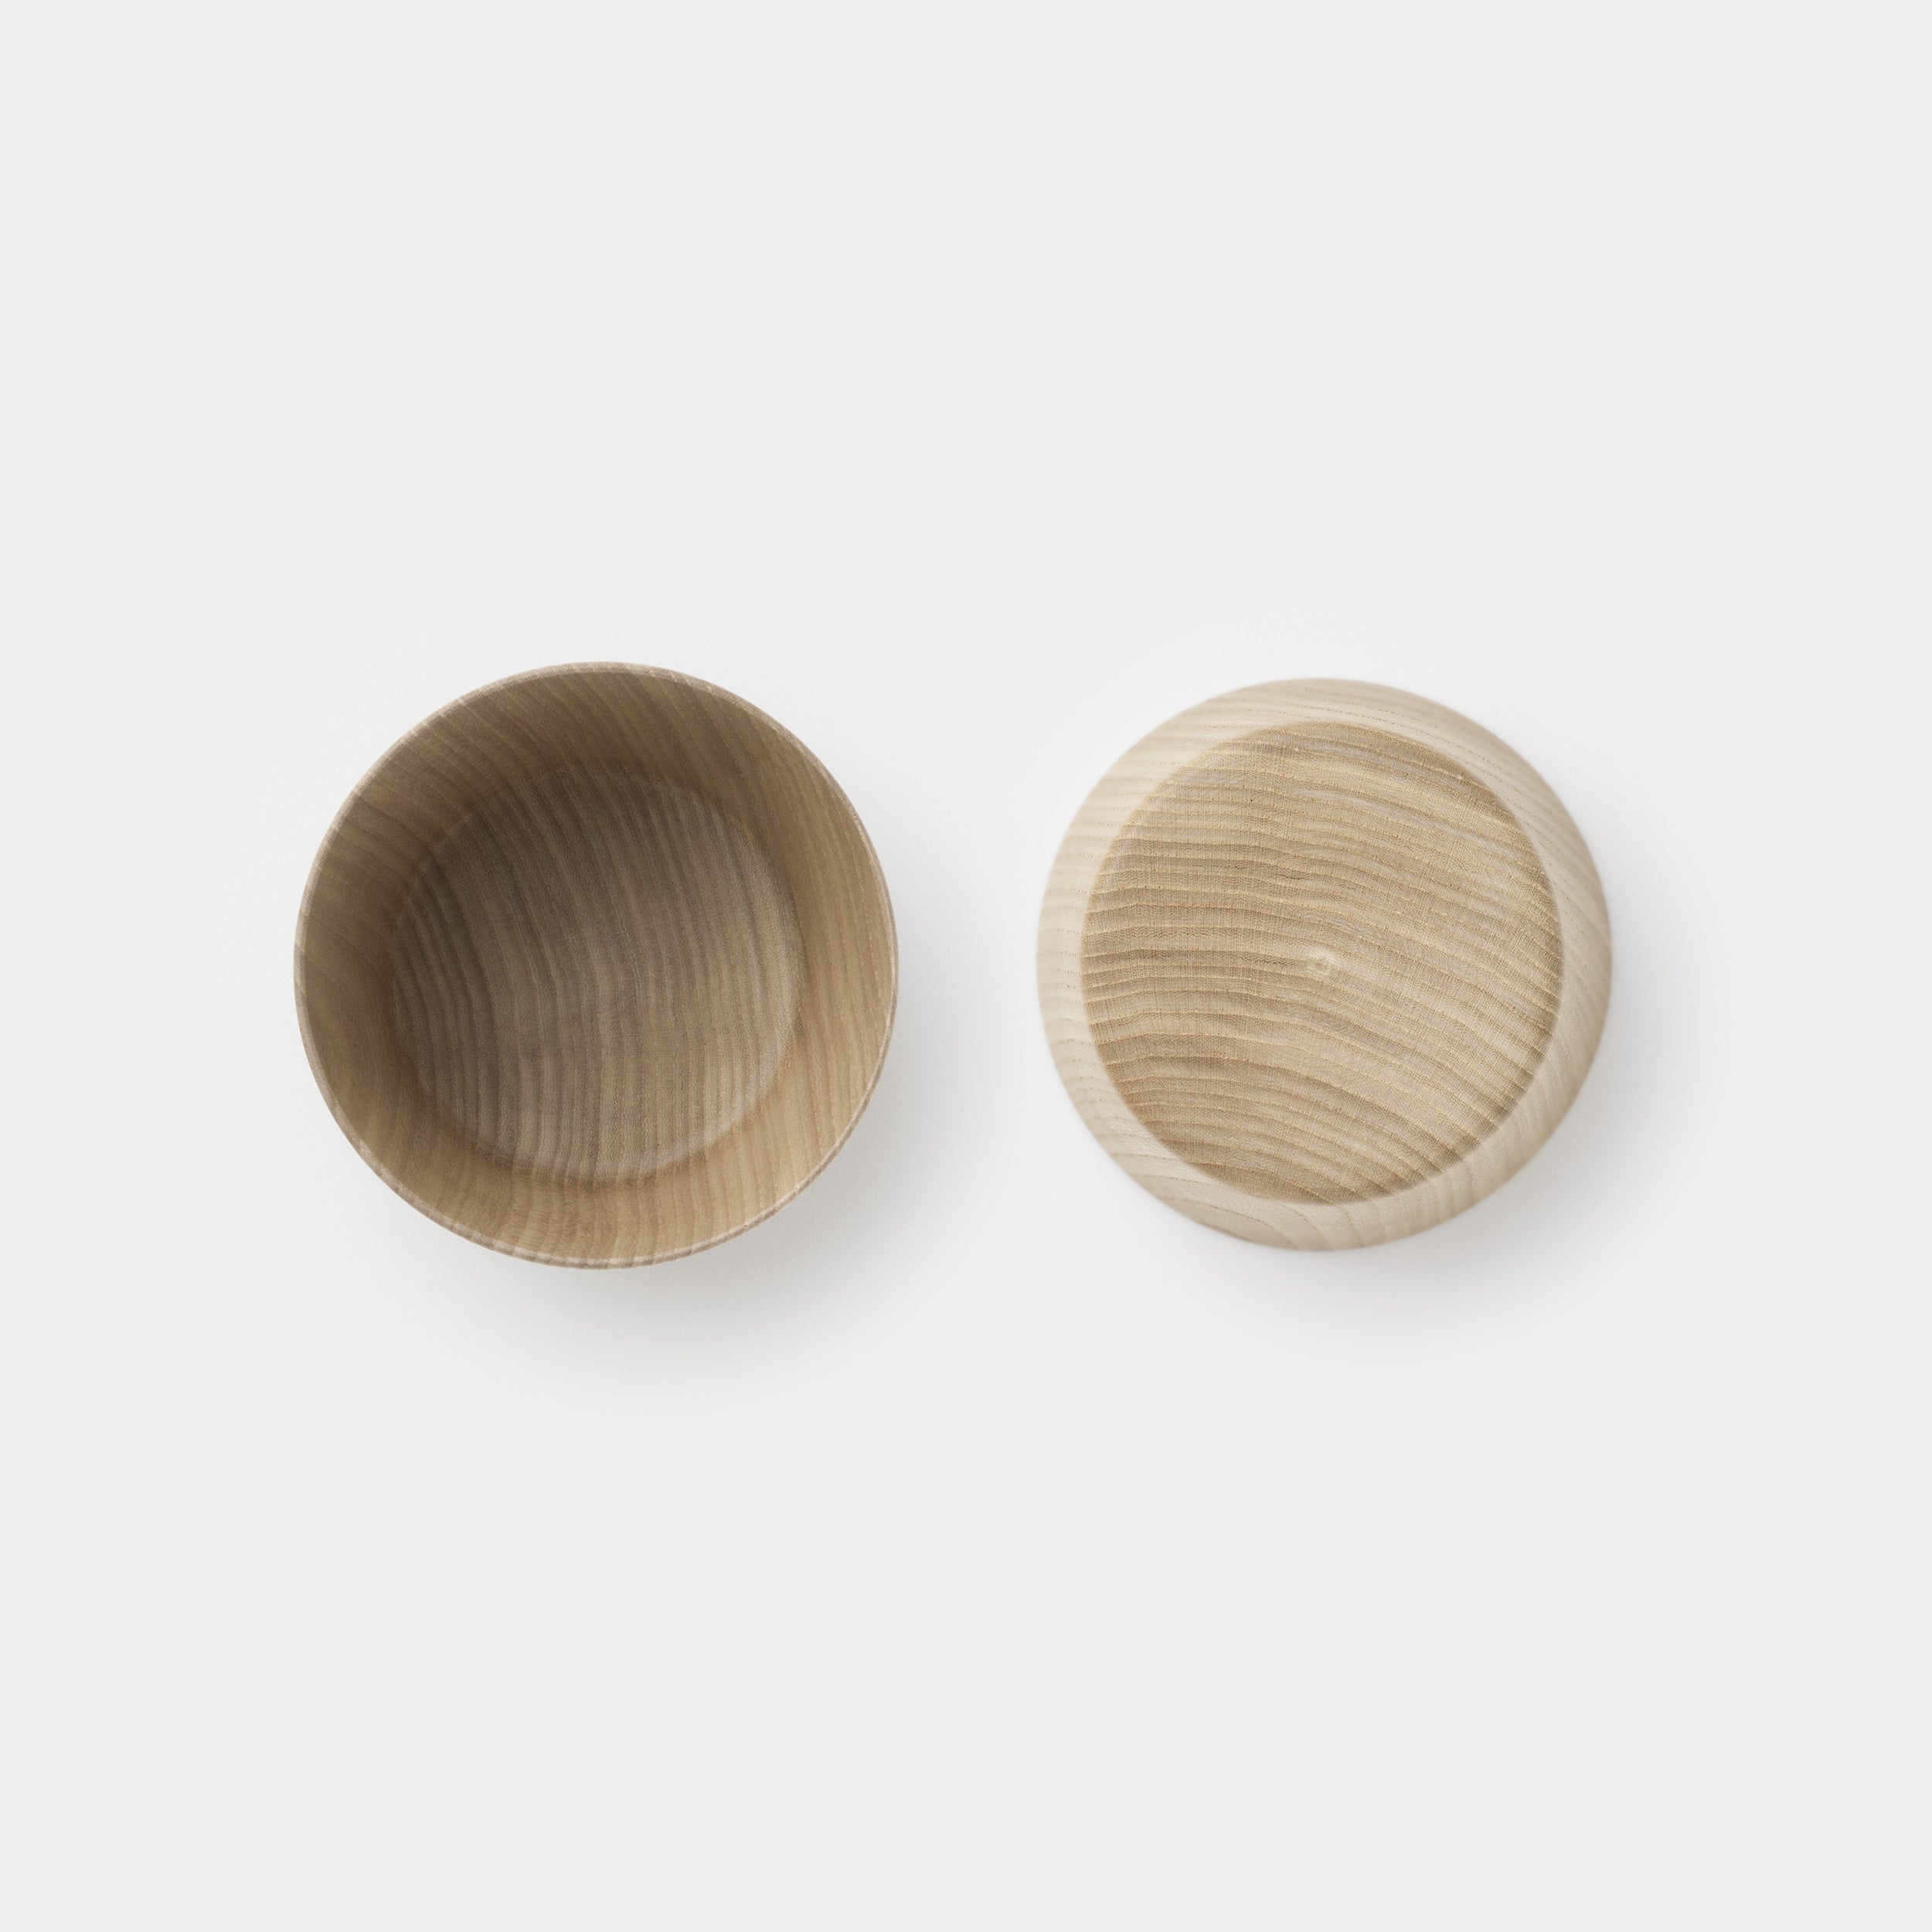 Kami Wood Cup Bowl top and bottom